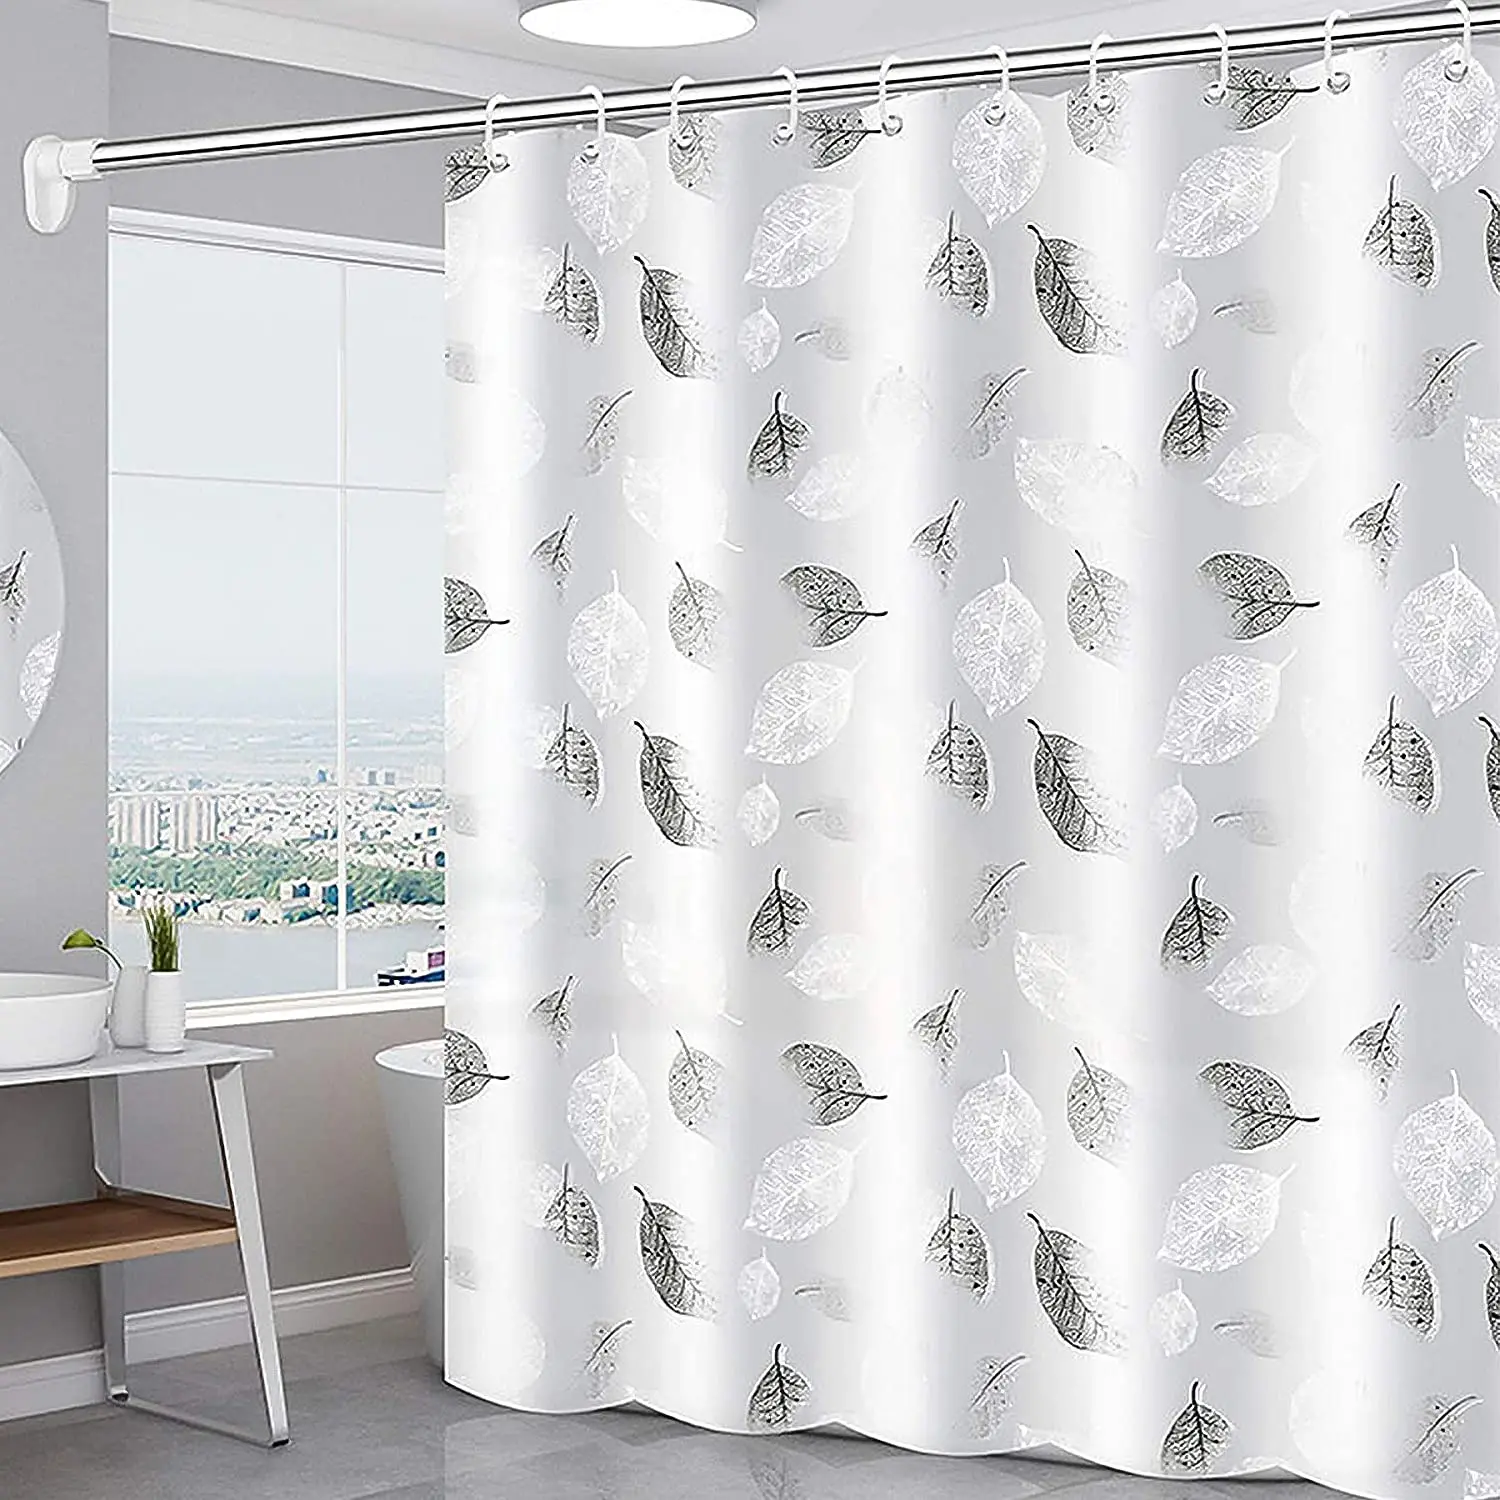 Shower Curtain with 10 Hook Waterproof Shower Bathtub Shower Curtain Washable Extra Long Curtains Bathroom